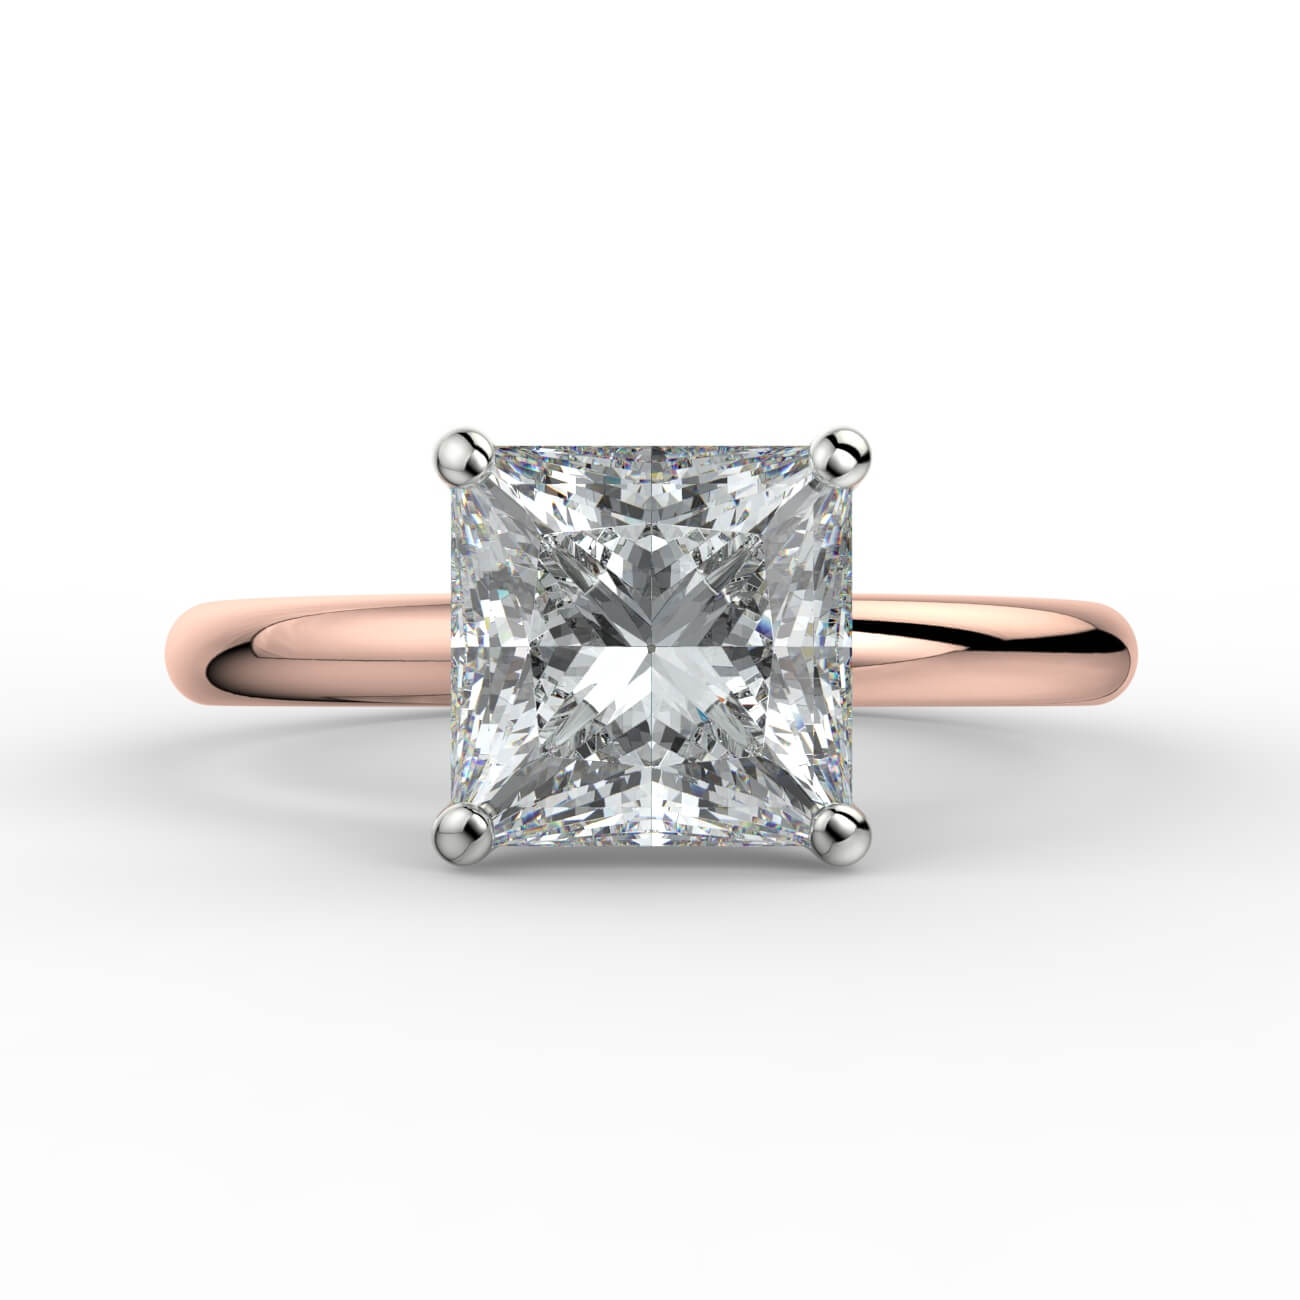 Comfort fit 4 claw princess cut solitaire diamond ring in rose and white gold – Australian Diamond Network